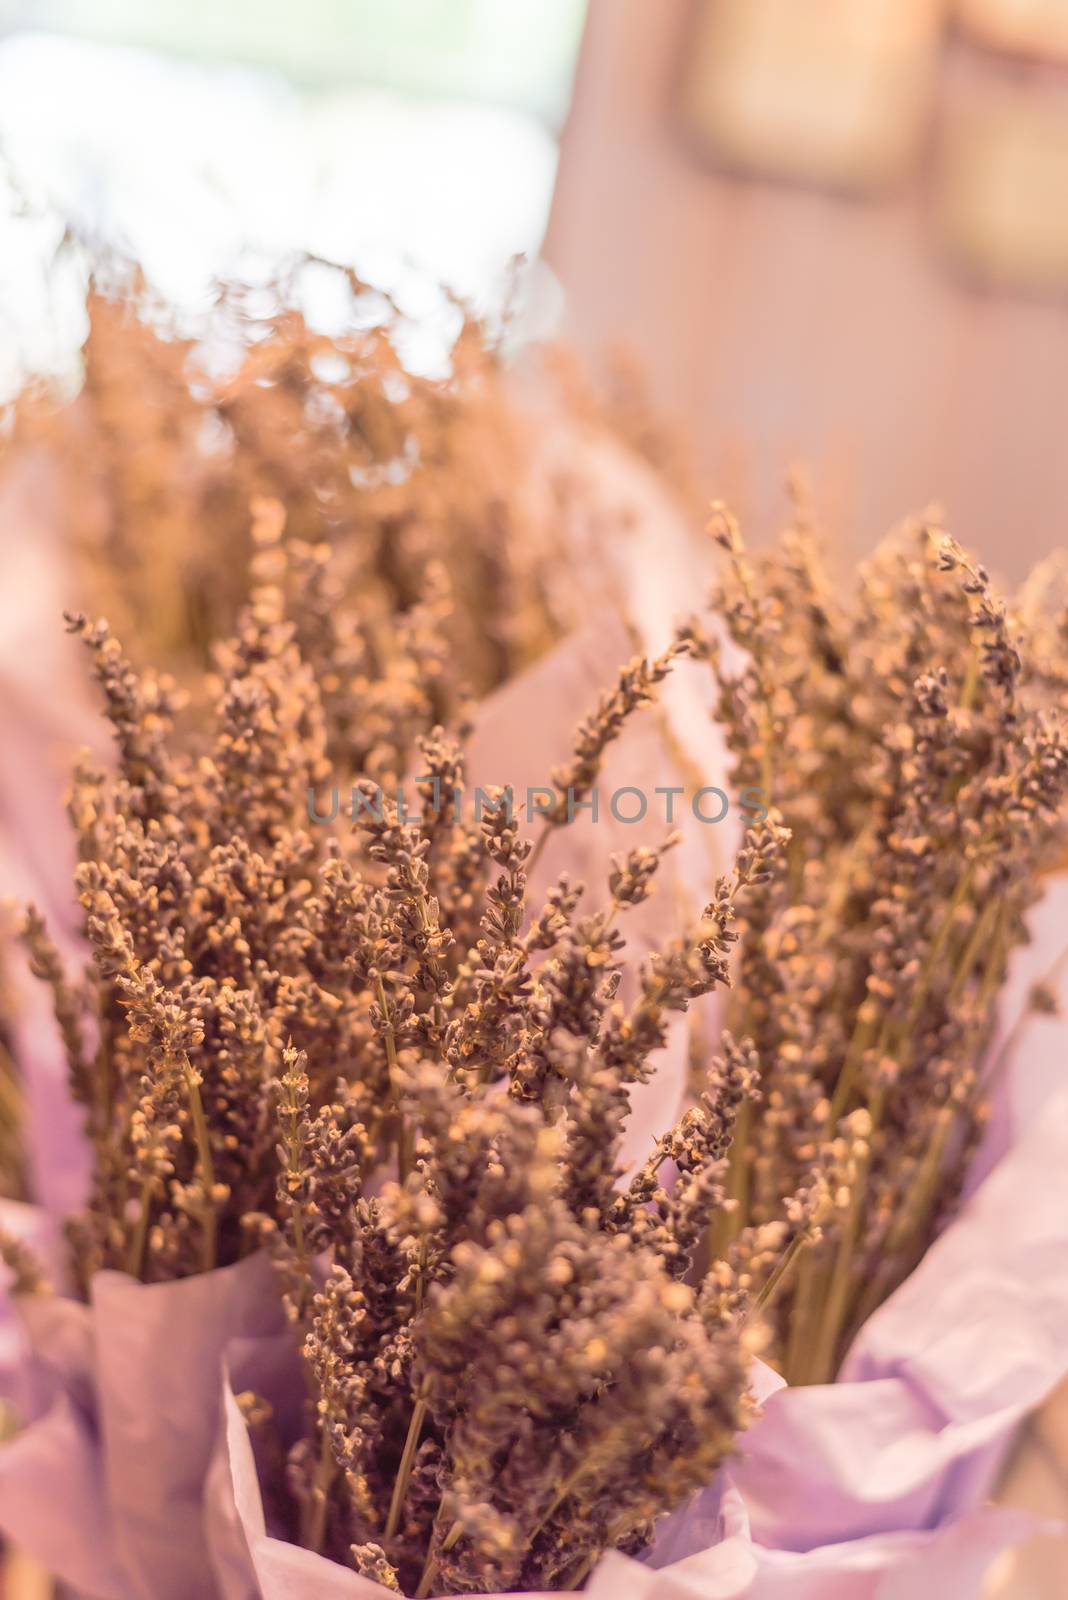 Lavender bouquet in paper wrap at local shop in Texas, USA by trongnguyen